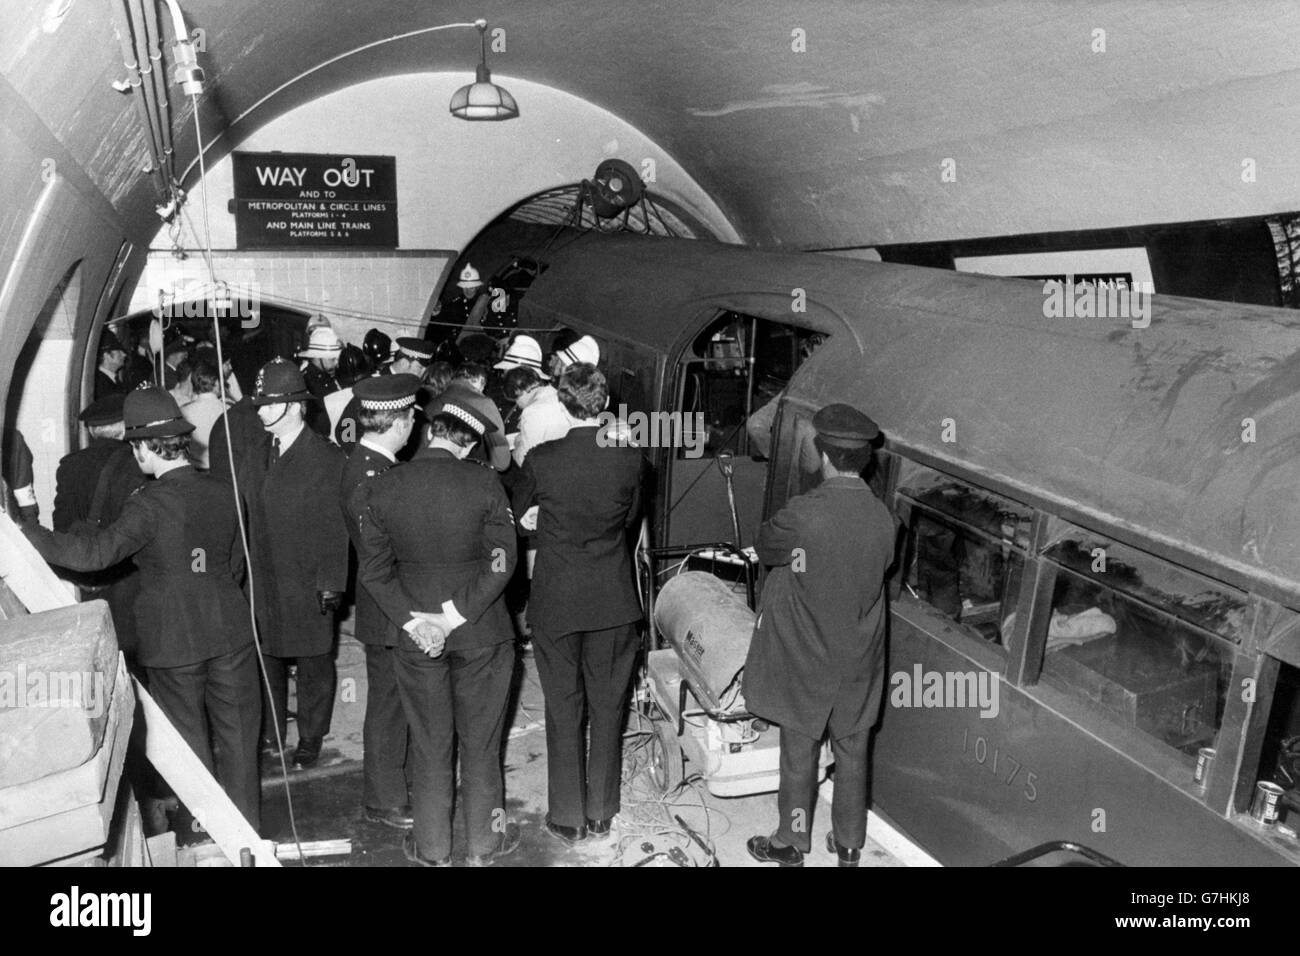 Disasters and Accidents - Moorgate Tube Crash - London - 1975 Stock Photo